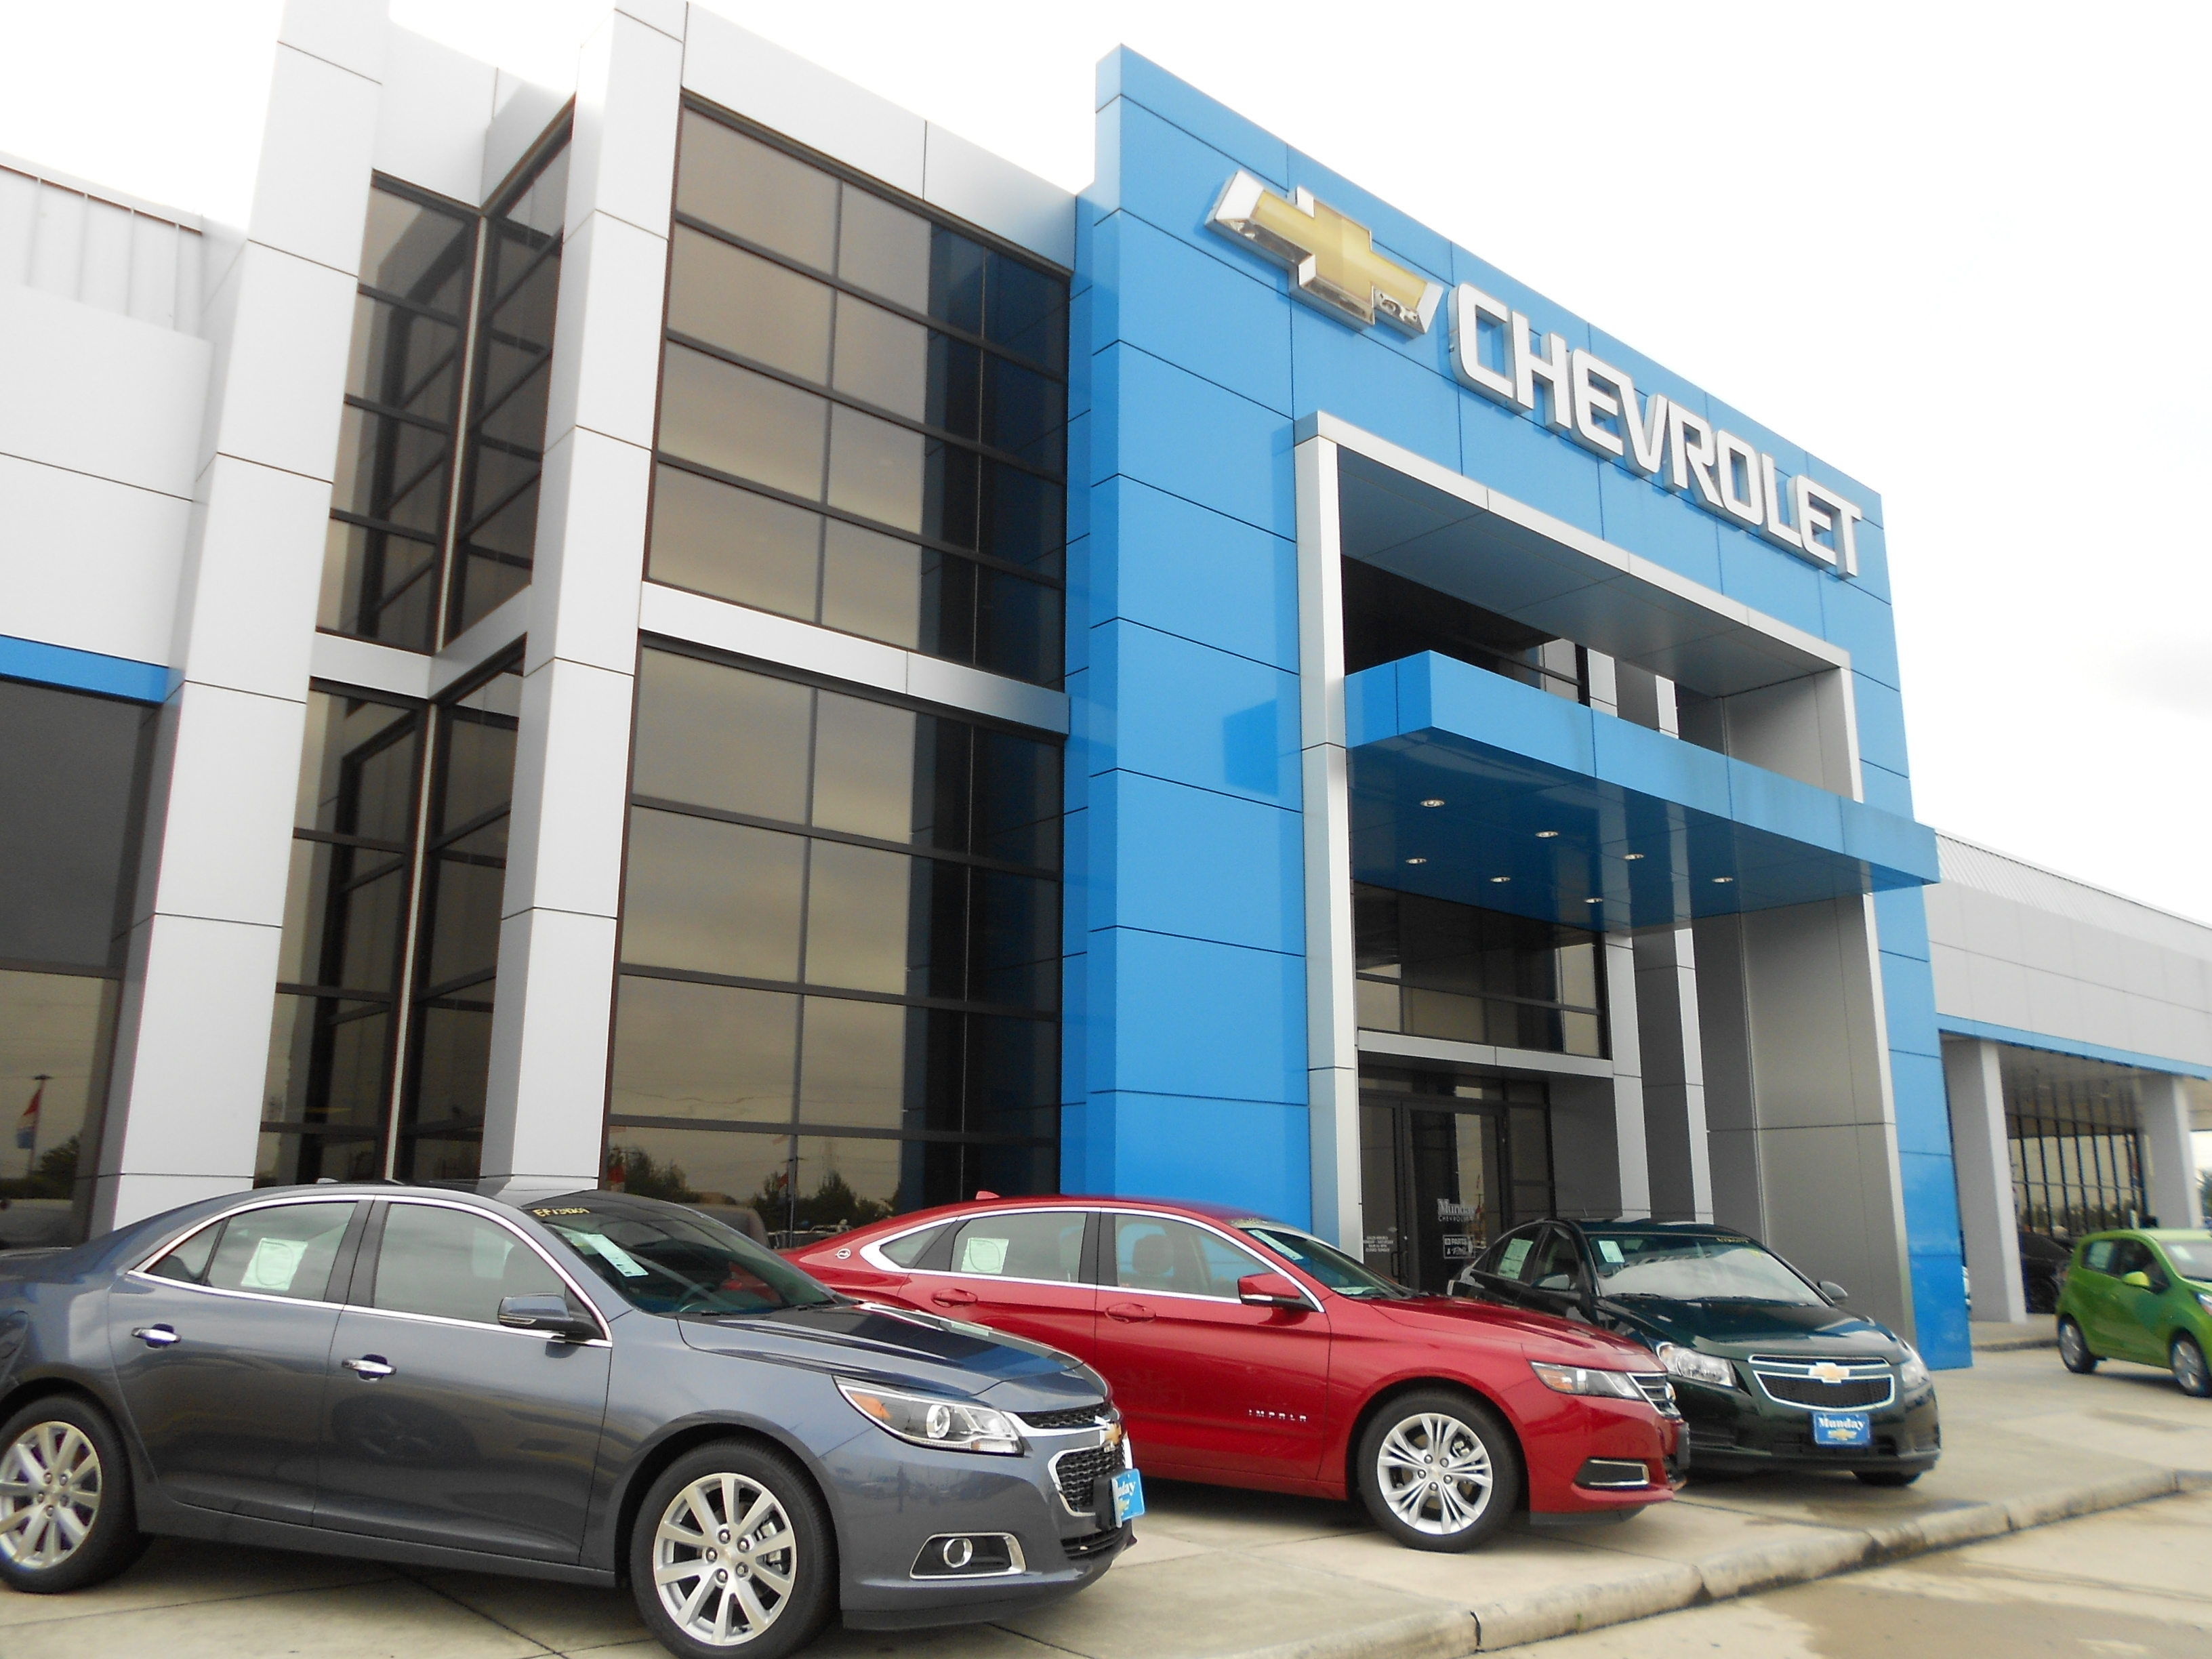 Sterling McCall Chevrolet Coupons near me in Houston, TX 77090 | 8coupons